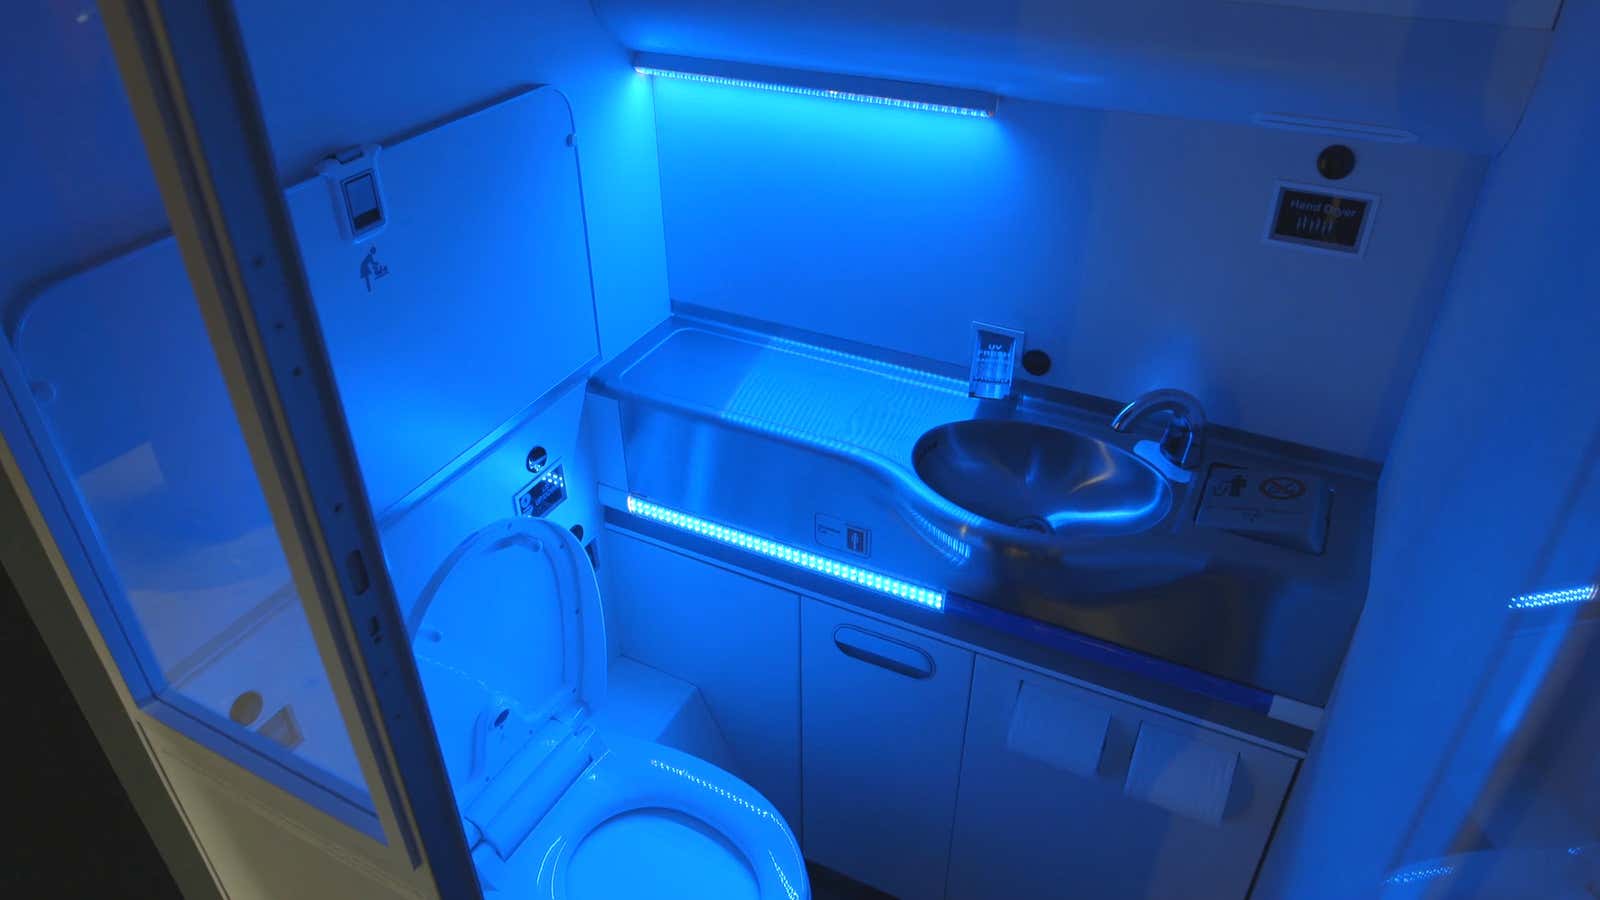 Boeing’s new technology could make your in-flight visit to the restroom much more pleasant.